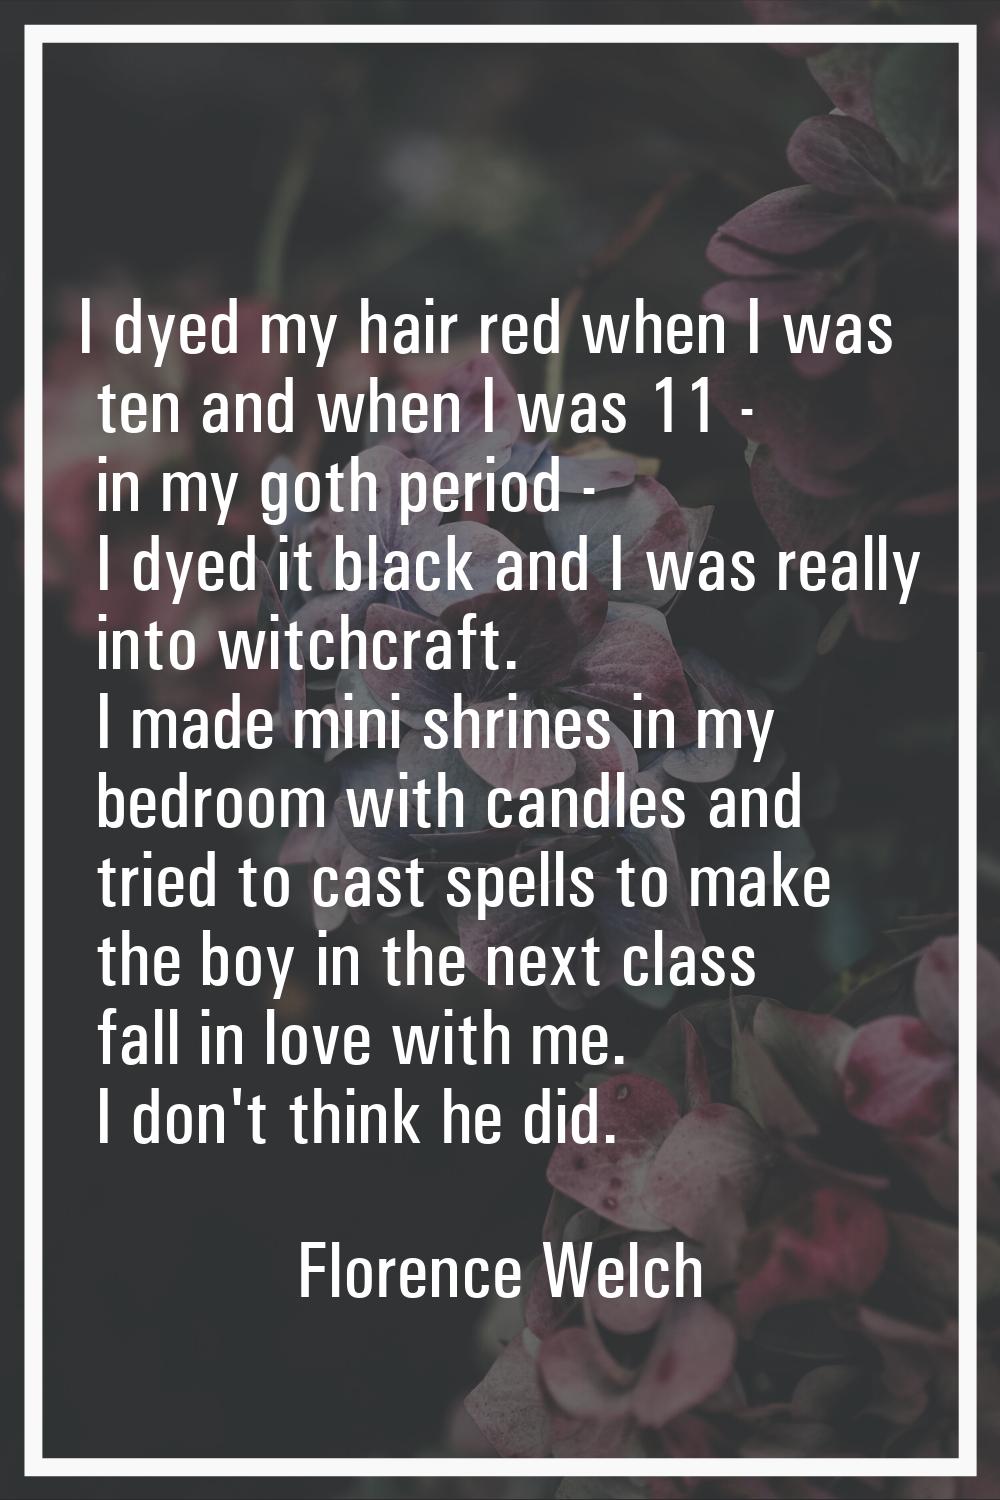 I dyed my hair red when I was ten and when I was 11 - in my goth period - I dyed it black and I was